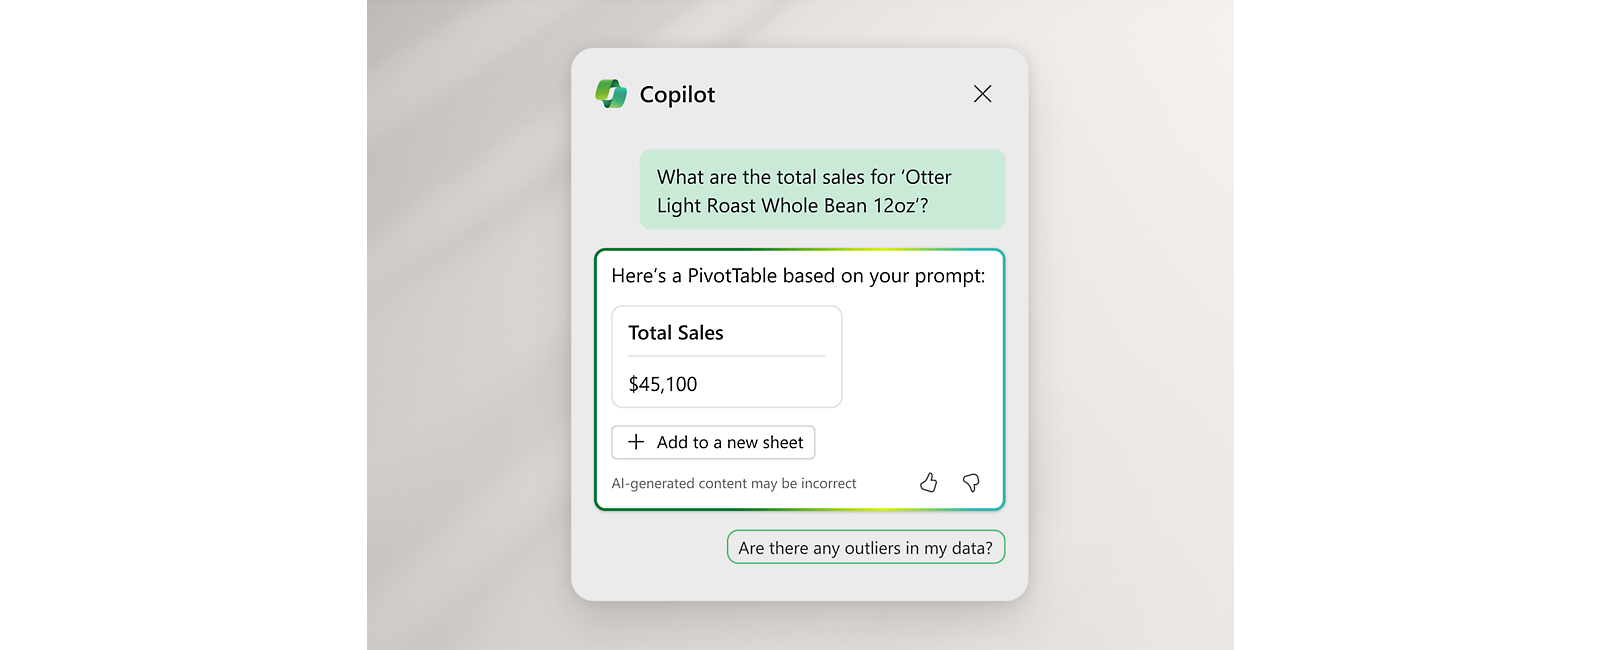 A query being asked to Copilot and response received as PivotTable